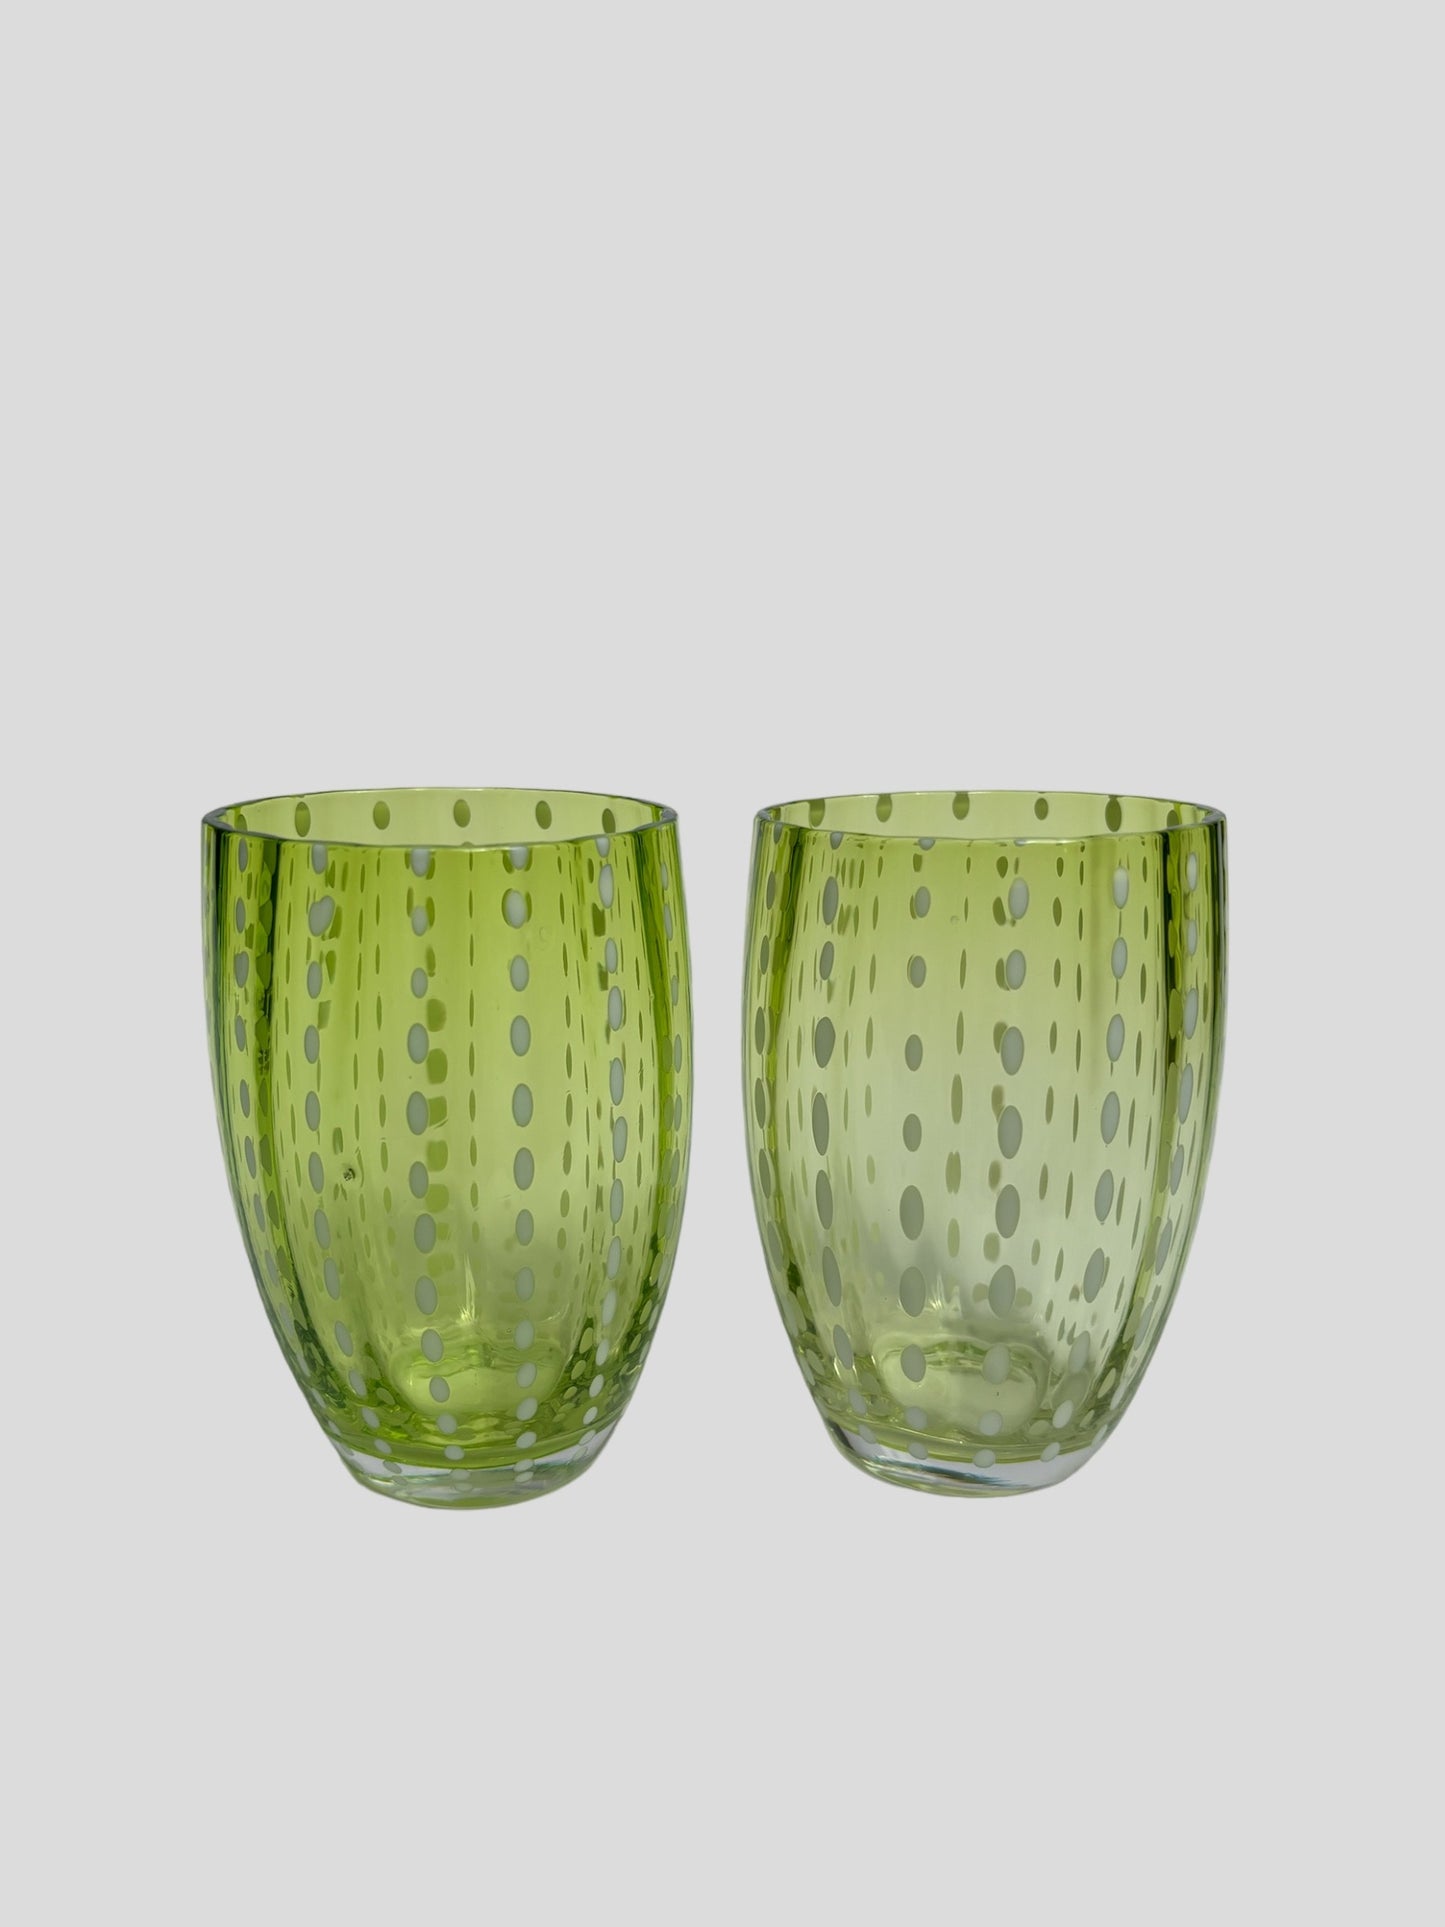 A pair of apple green glass tumblers with hand-painted dot design